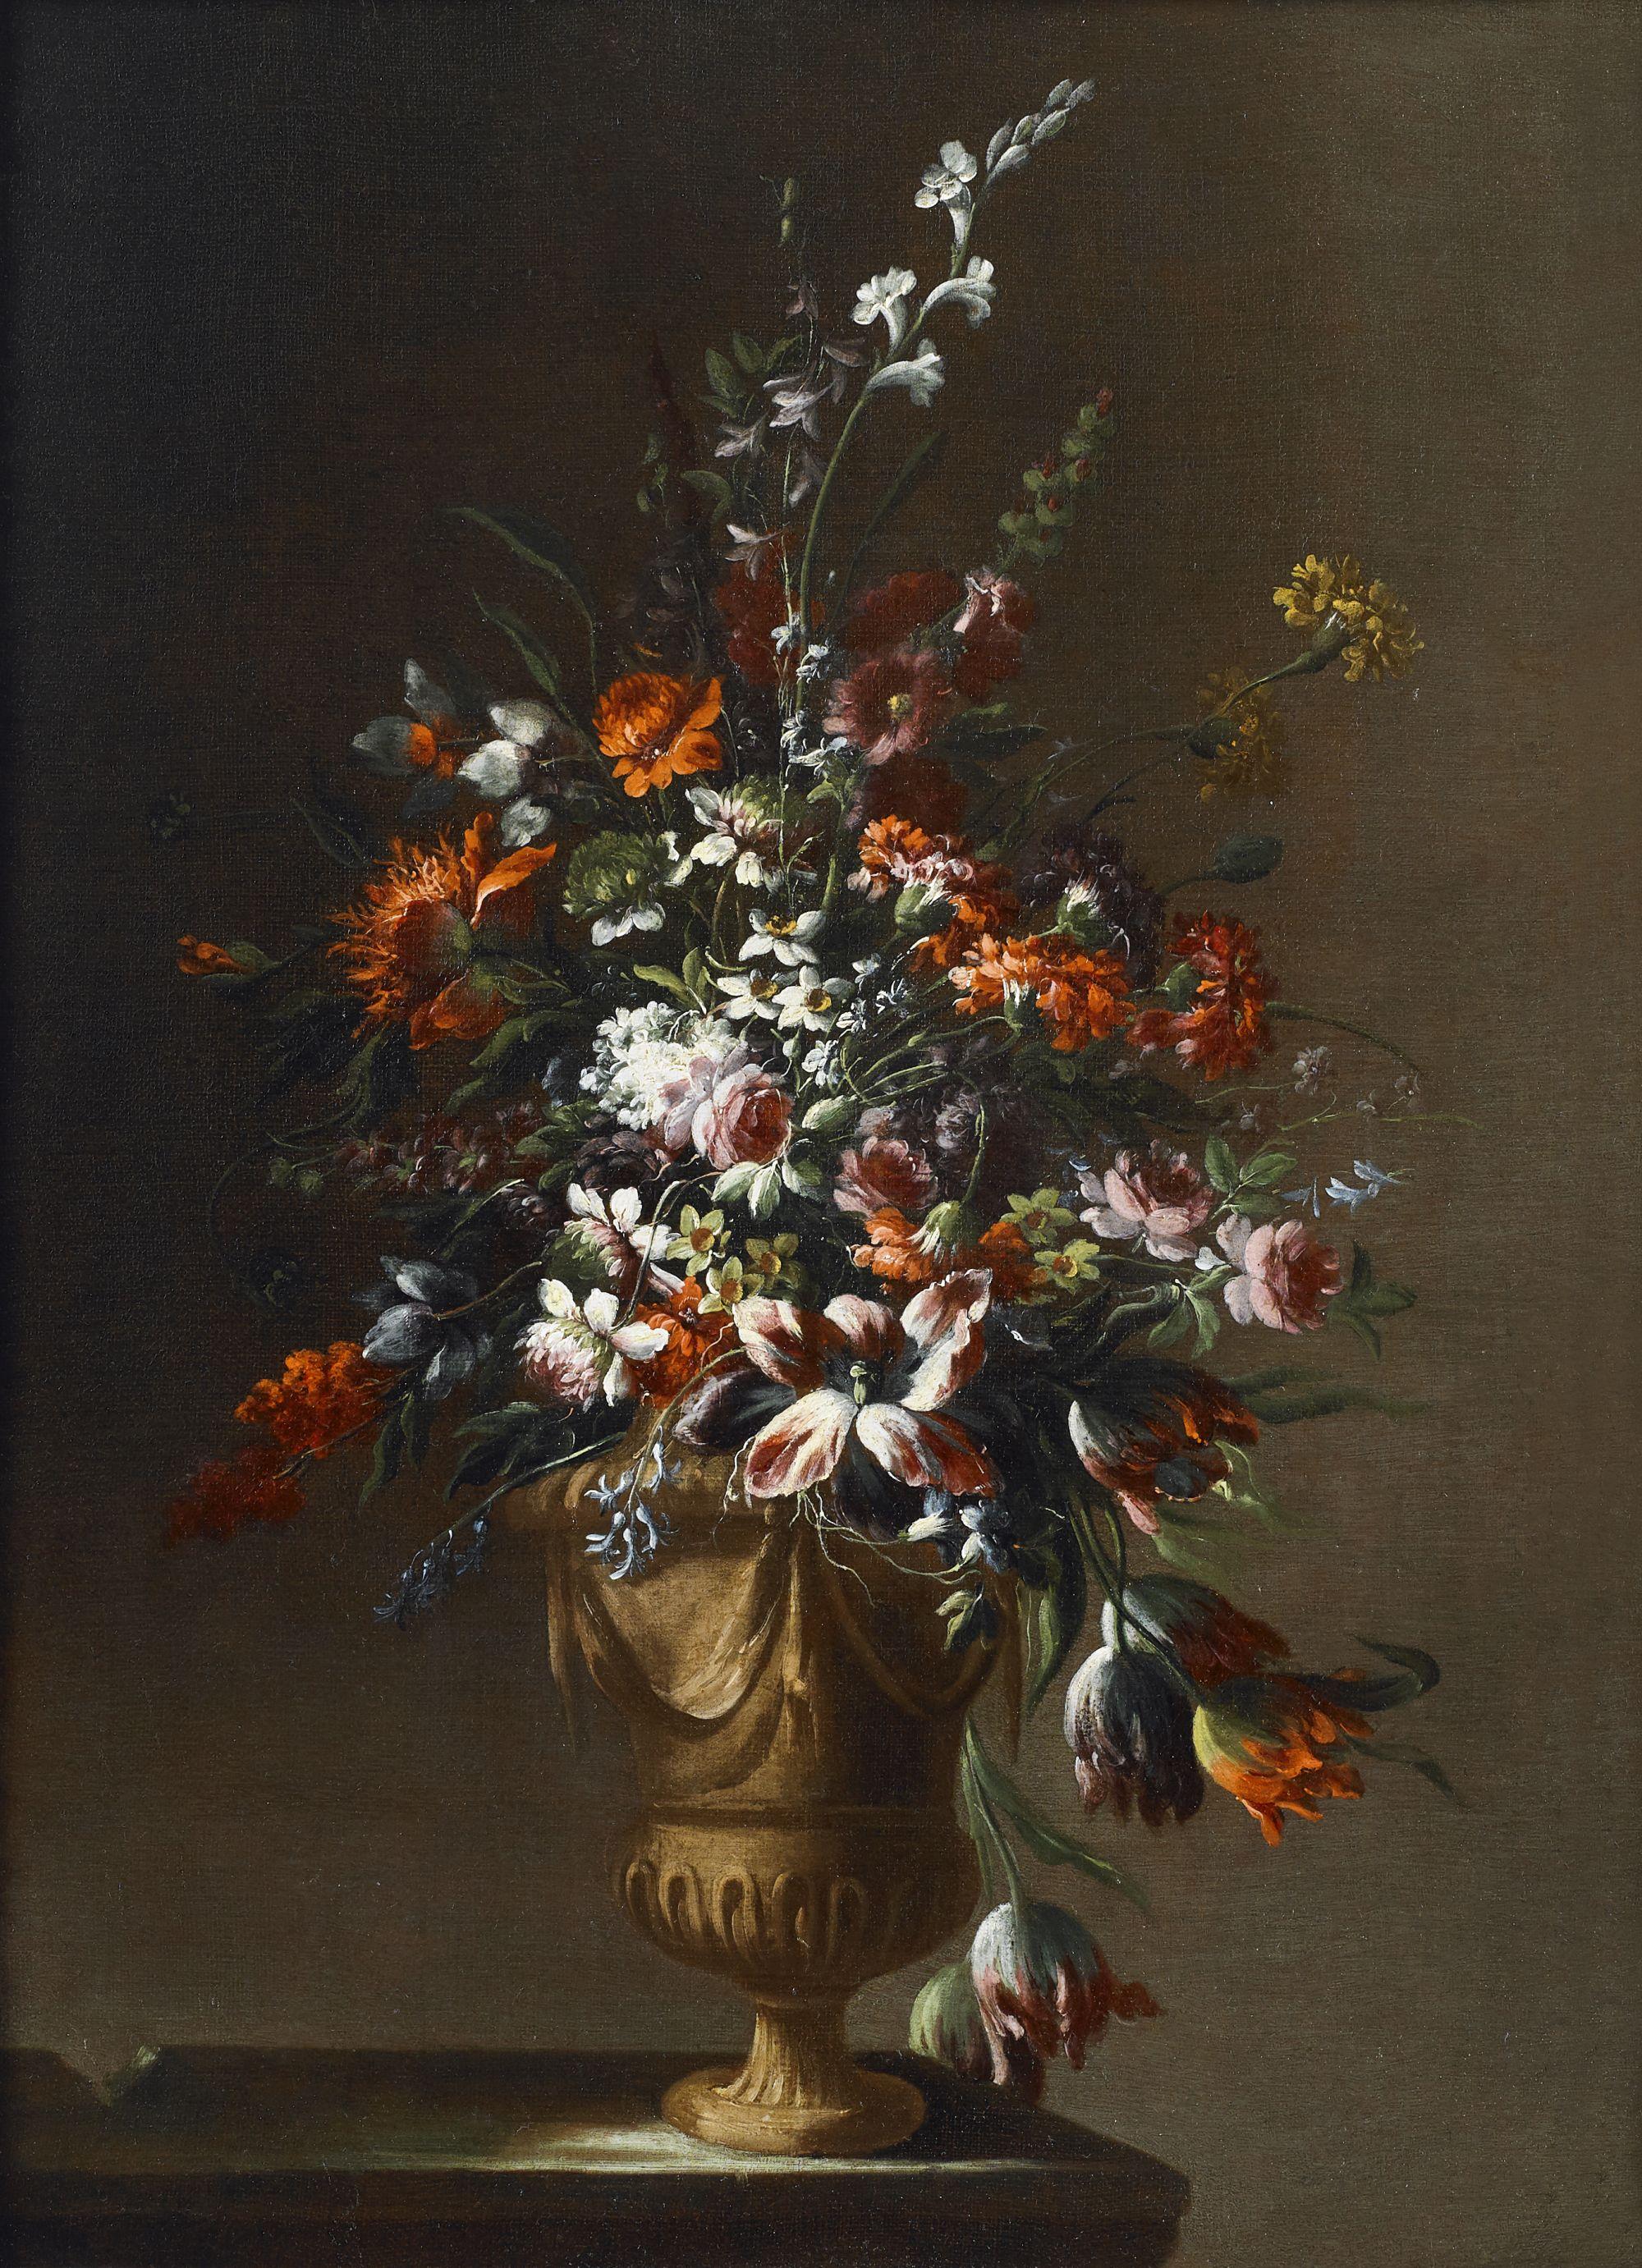 Painting oil on canvas measuring 67 x 45 cm without frame and 82 x 60 depicting a vase of flowers by the painter Niccolò Stanchi ( Rome 1626 - 1690 ).

The Stanchi brothers (Giovanni, Niccolò and Angelo), Roman painters of the 17th century, famous